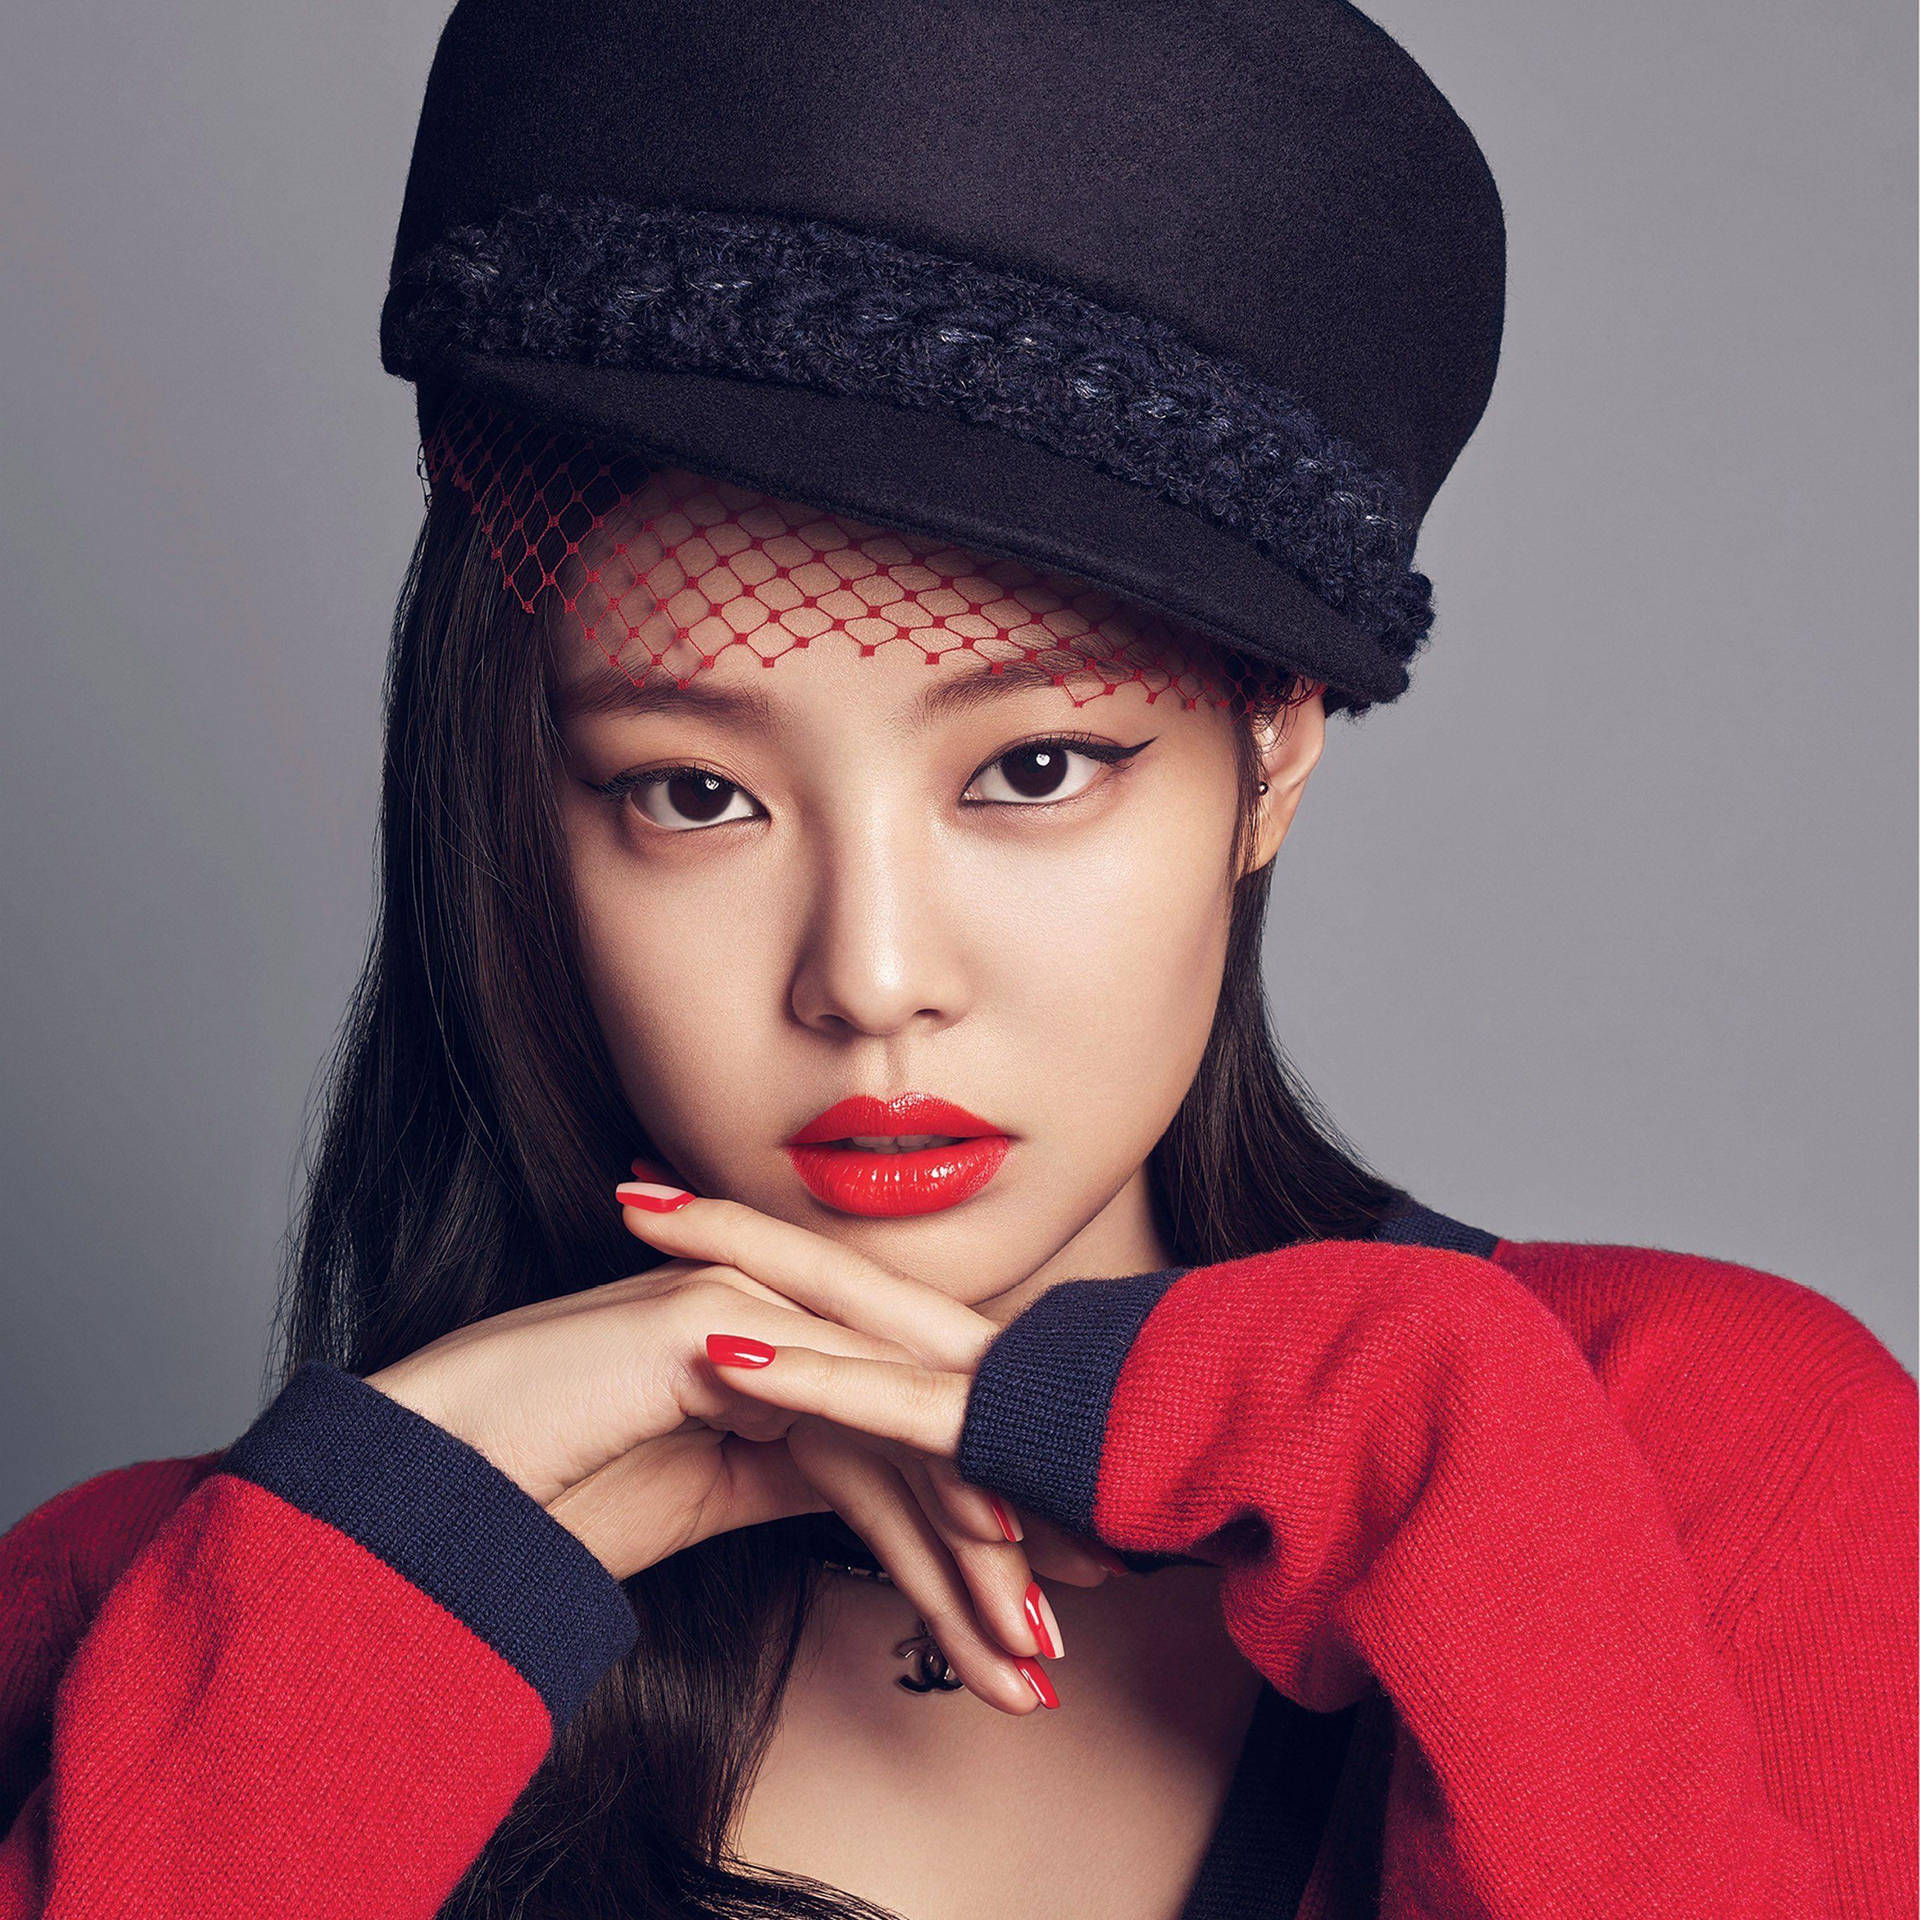 Jennie Wearing Red Coat And Hat